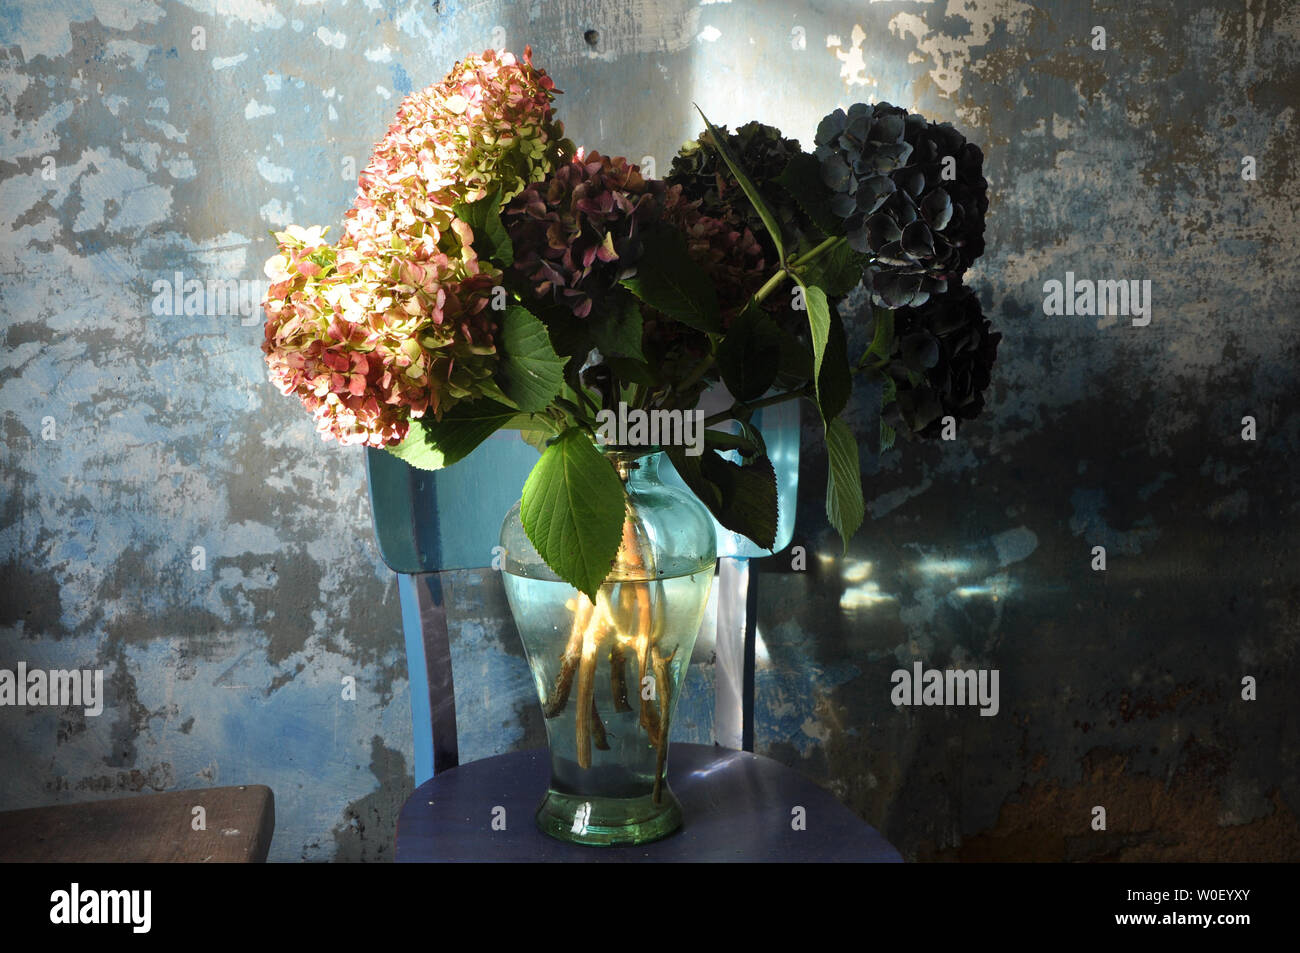 France, Bretagne,Taupont, Autumn, Interior photography, bunch of flowers, blues and pinks hydrangeas in a transparent glass vase on a blue chair, enlighten by the sun Stock Photo